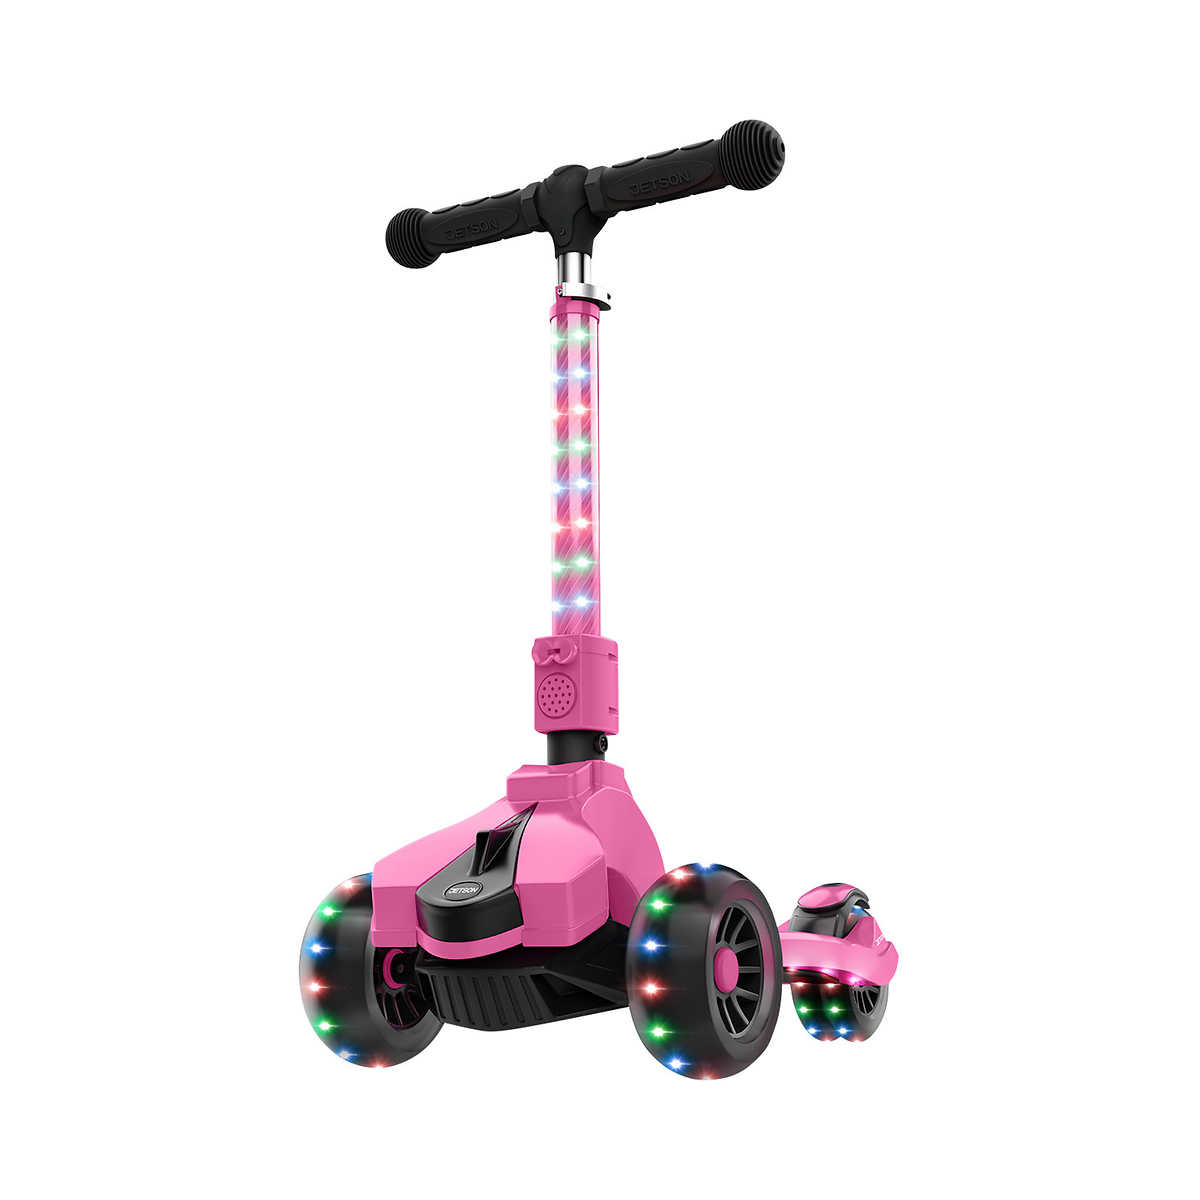 Kids Scooter with Led Light up for Boys&Girls Alorero 3 Wheel Kick Scooter for Kids Toddler Adjustable Height Folding Scooter for Children from 3 to 12 Years Old